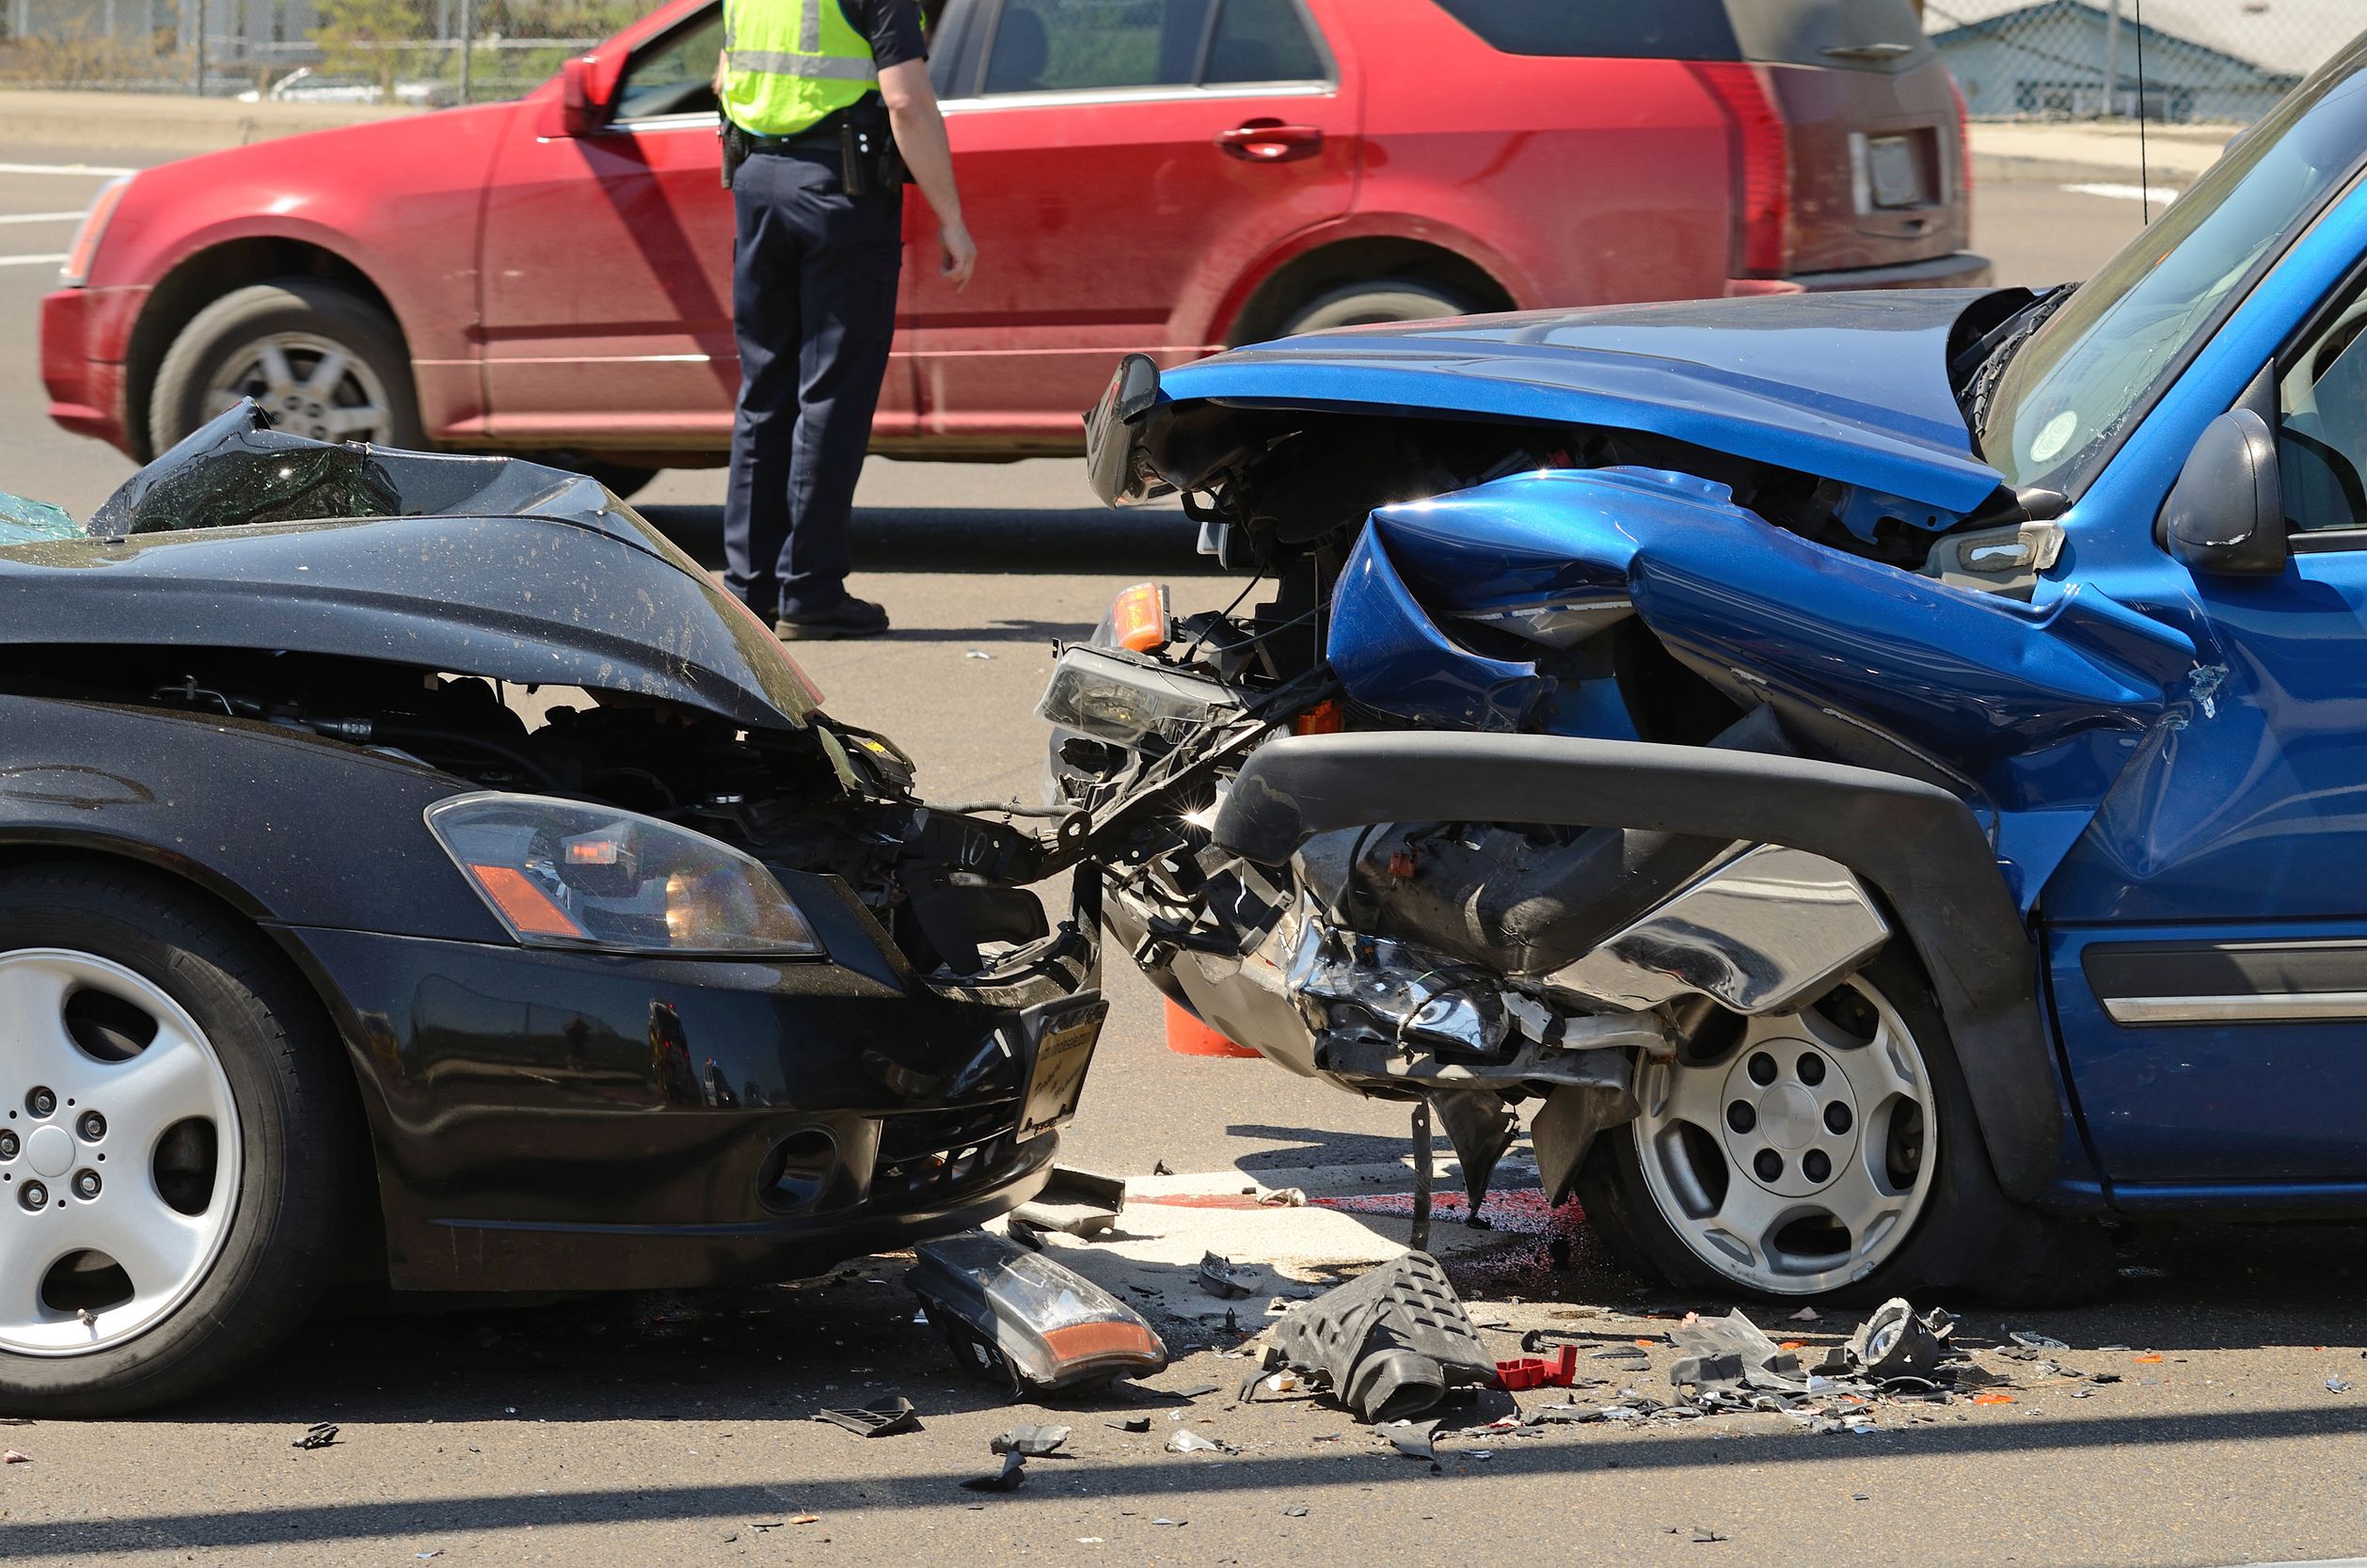 Find an Attorney after an Automobile Accident